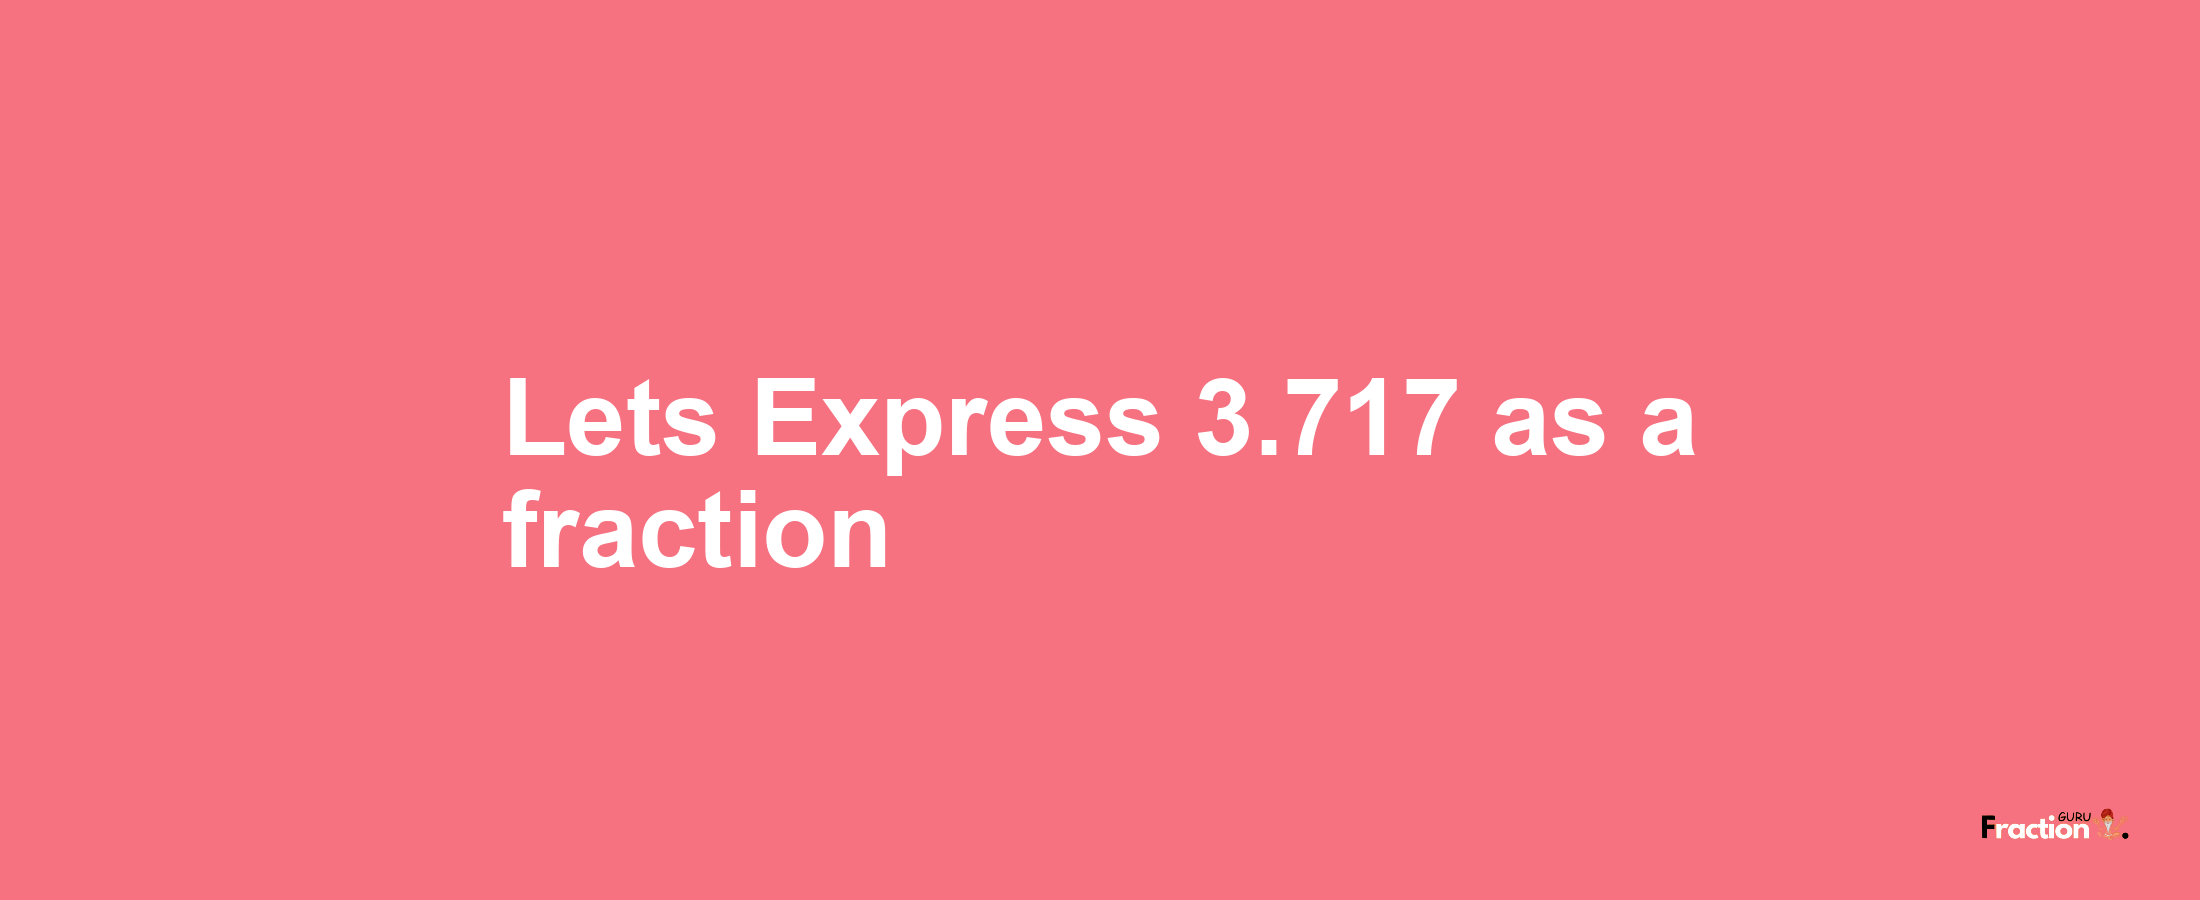 Lets Express 3.717 as afraction